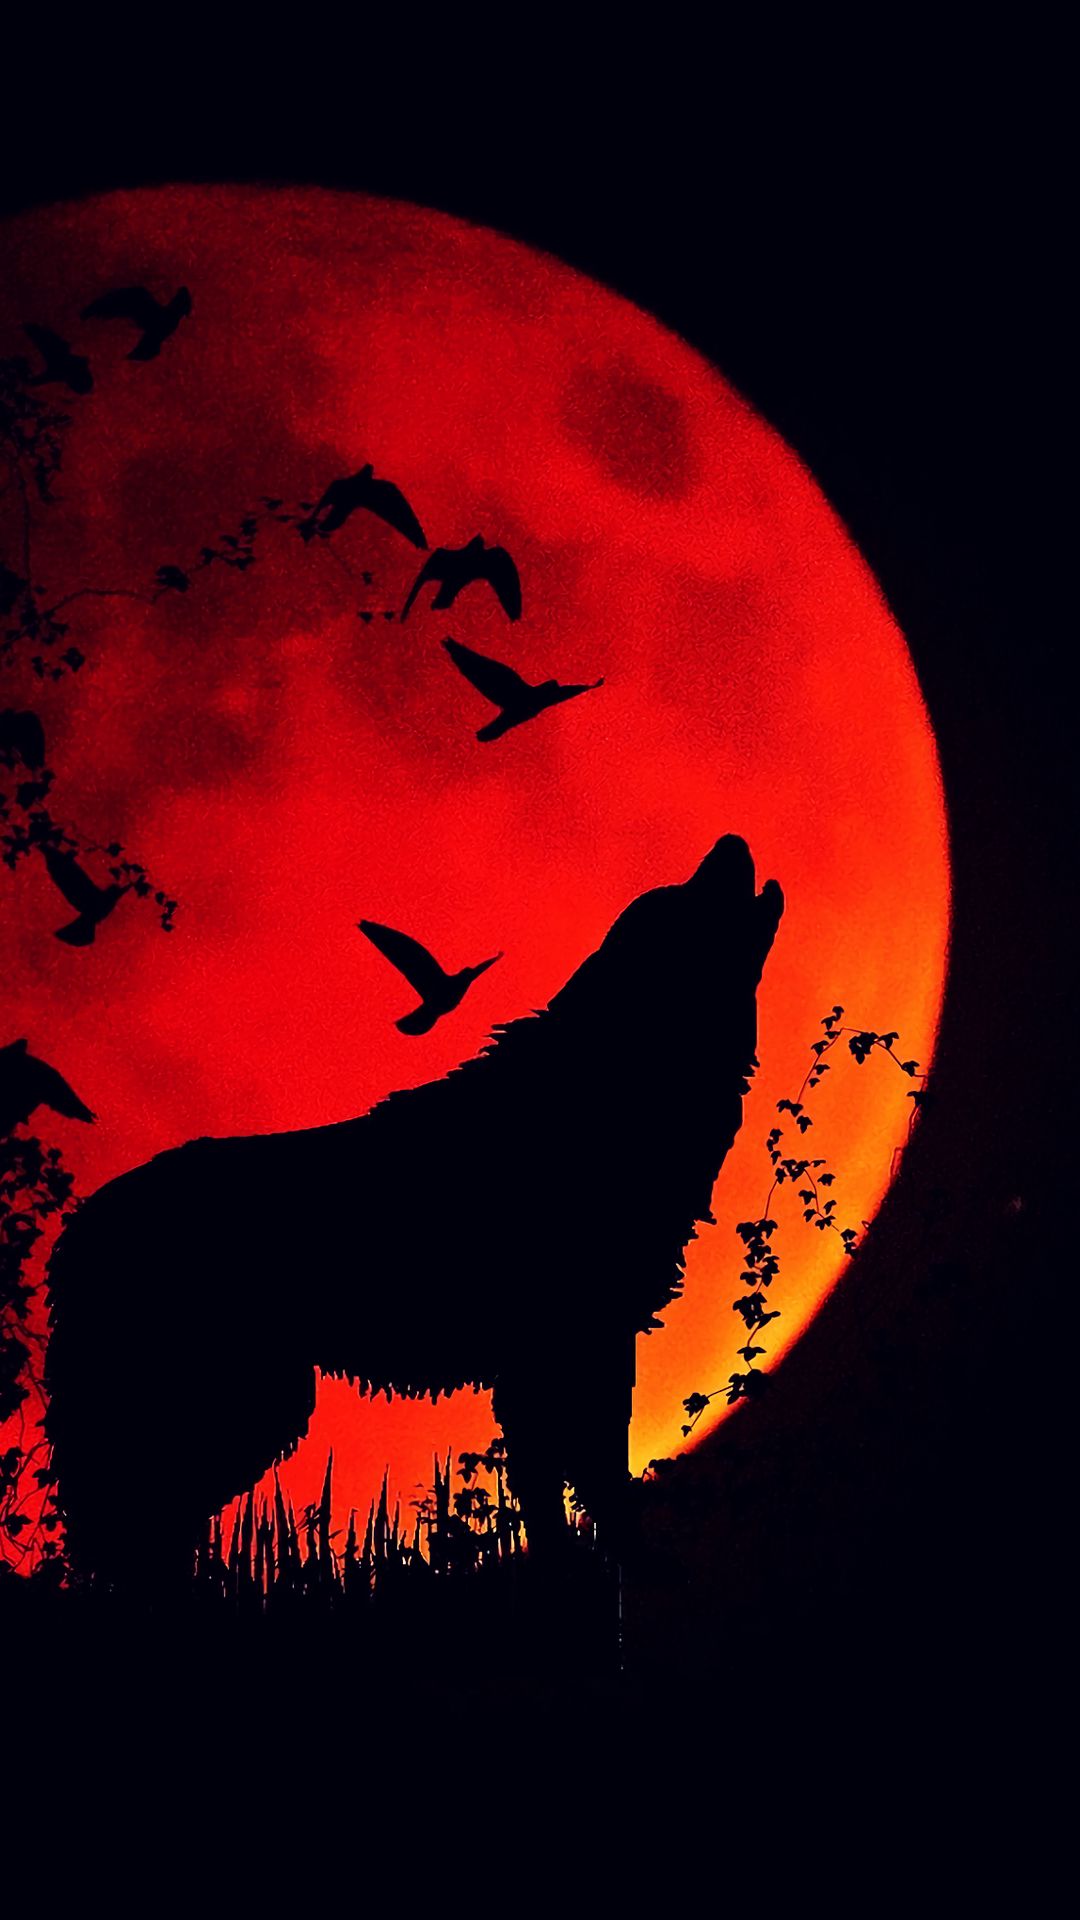 hd pics photos stunning howling wolf fantasy moon animated hd quality desktop  background wallpaper